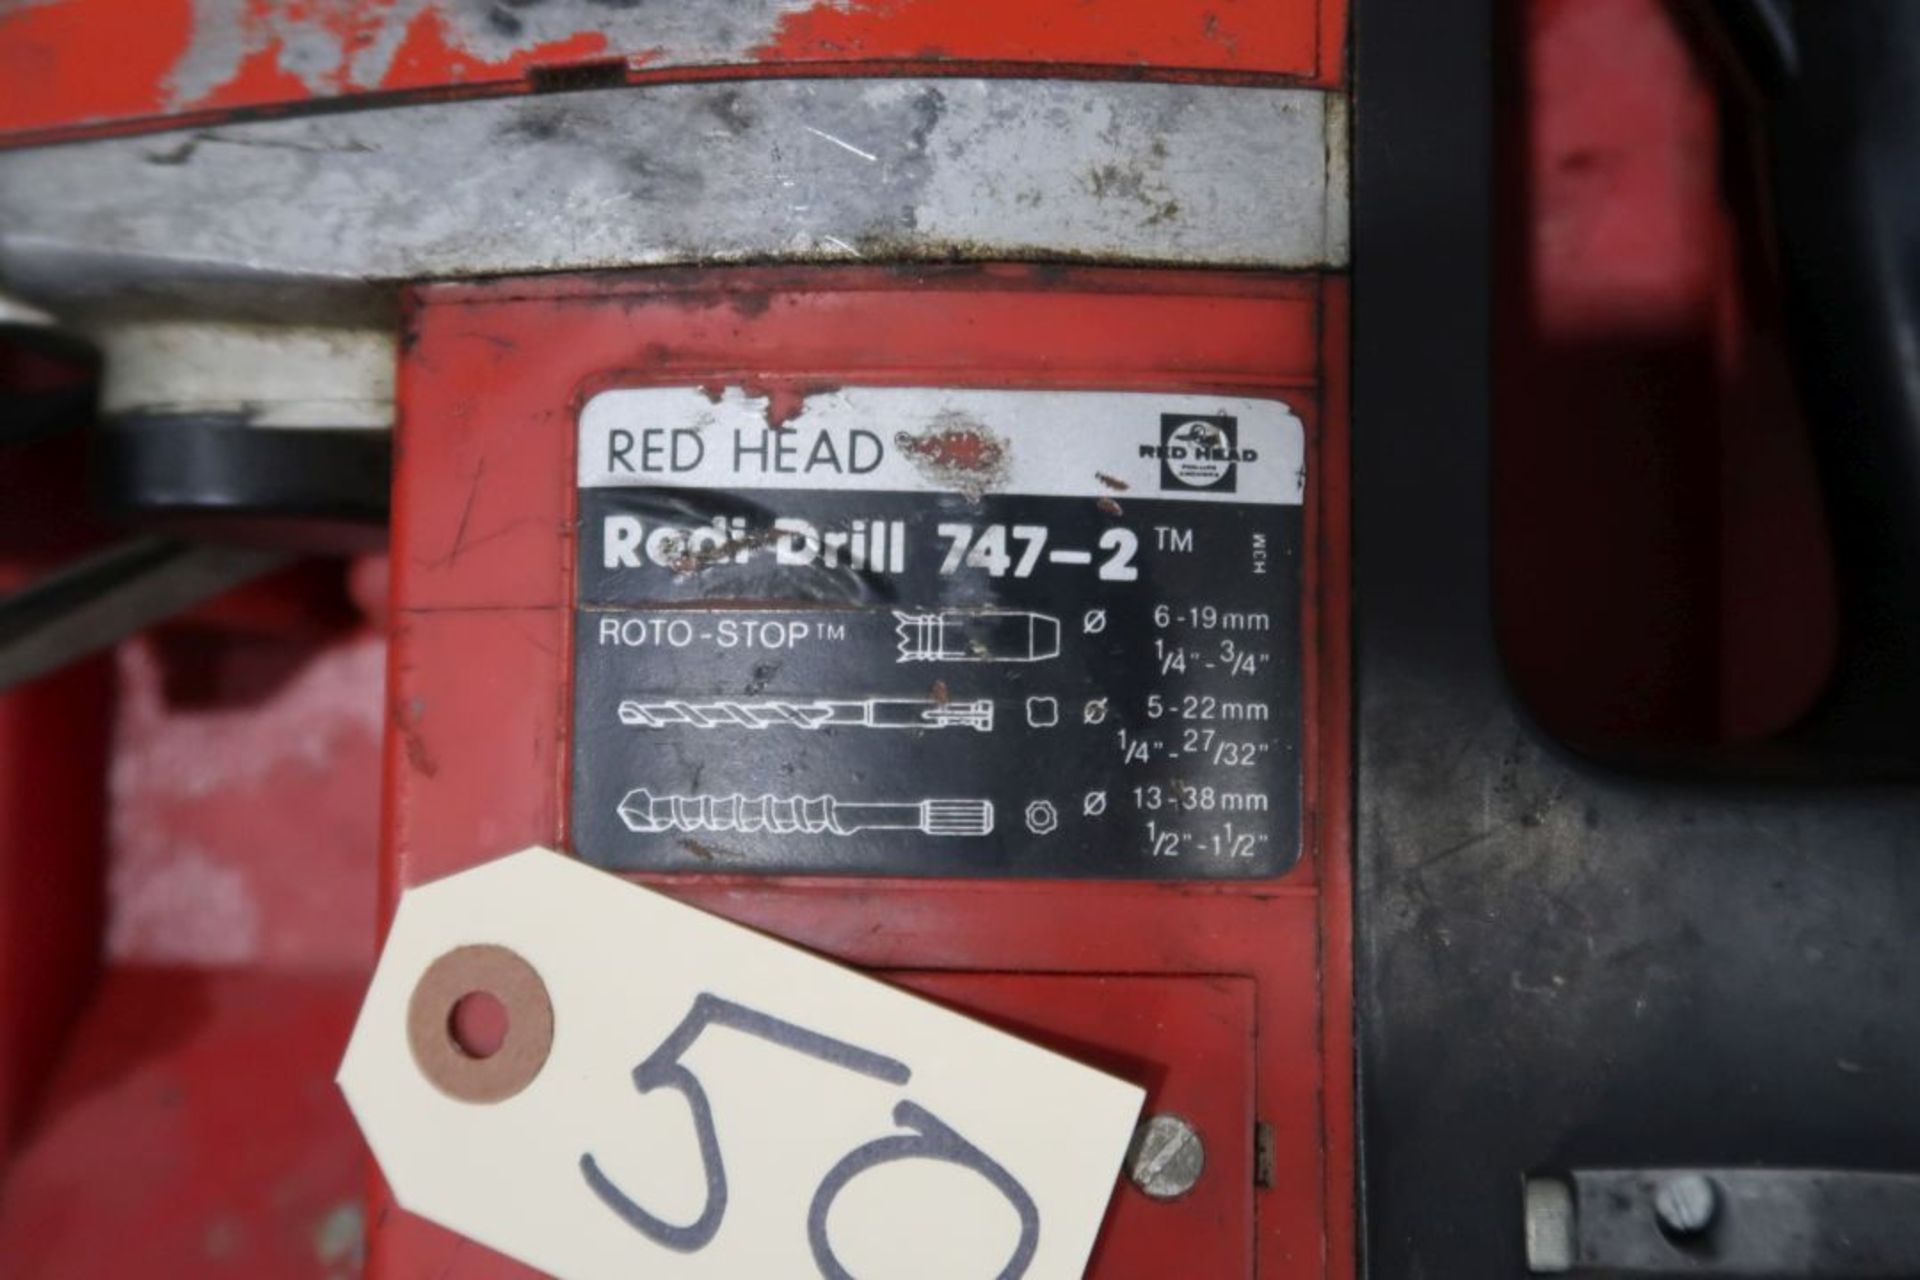 RED HEAD REDI DRILL ROTO STOP HAMMER, MOD: 747-2 - Image 2 of 3